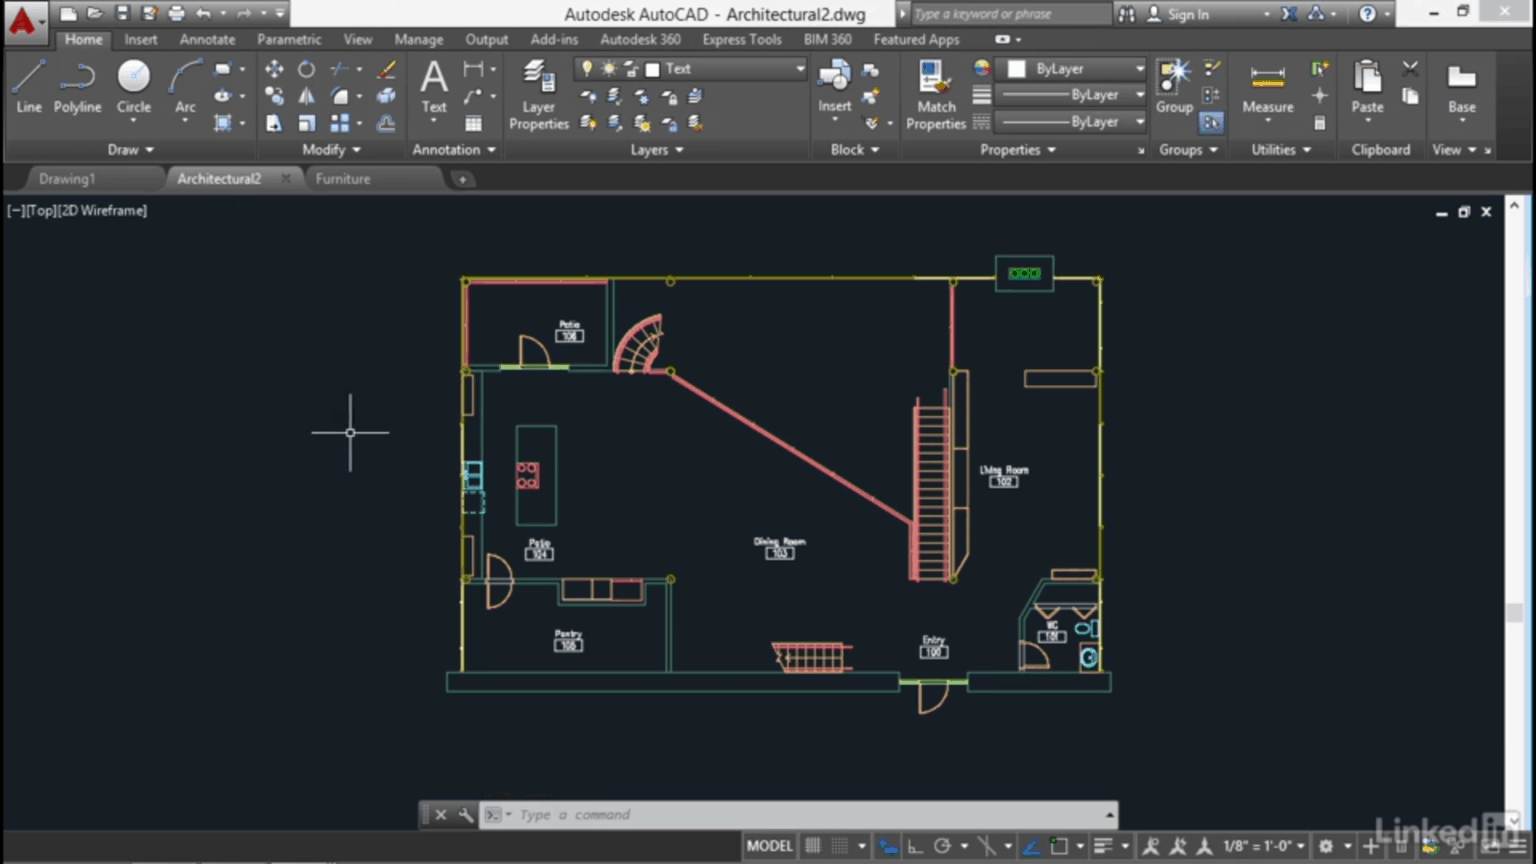 autocad 2015 system requirements graphics card